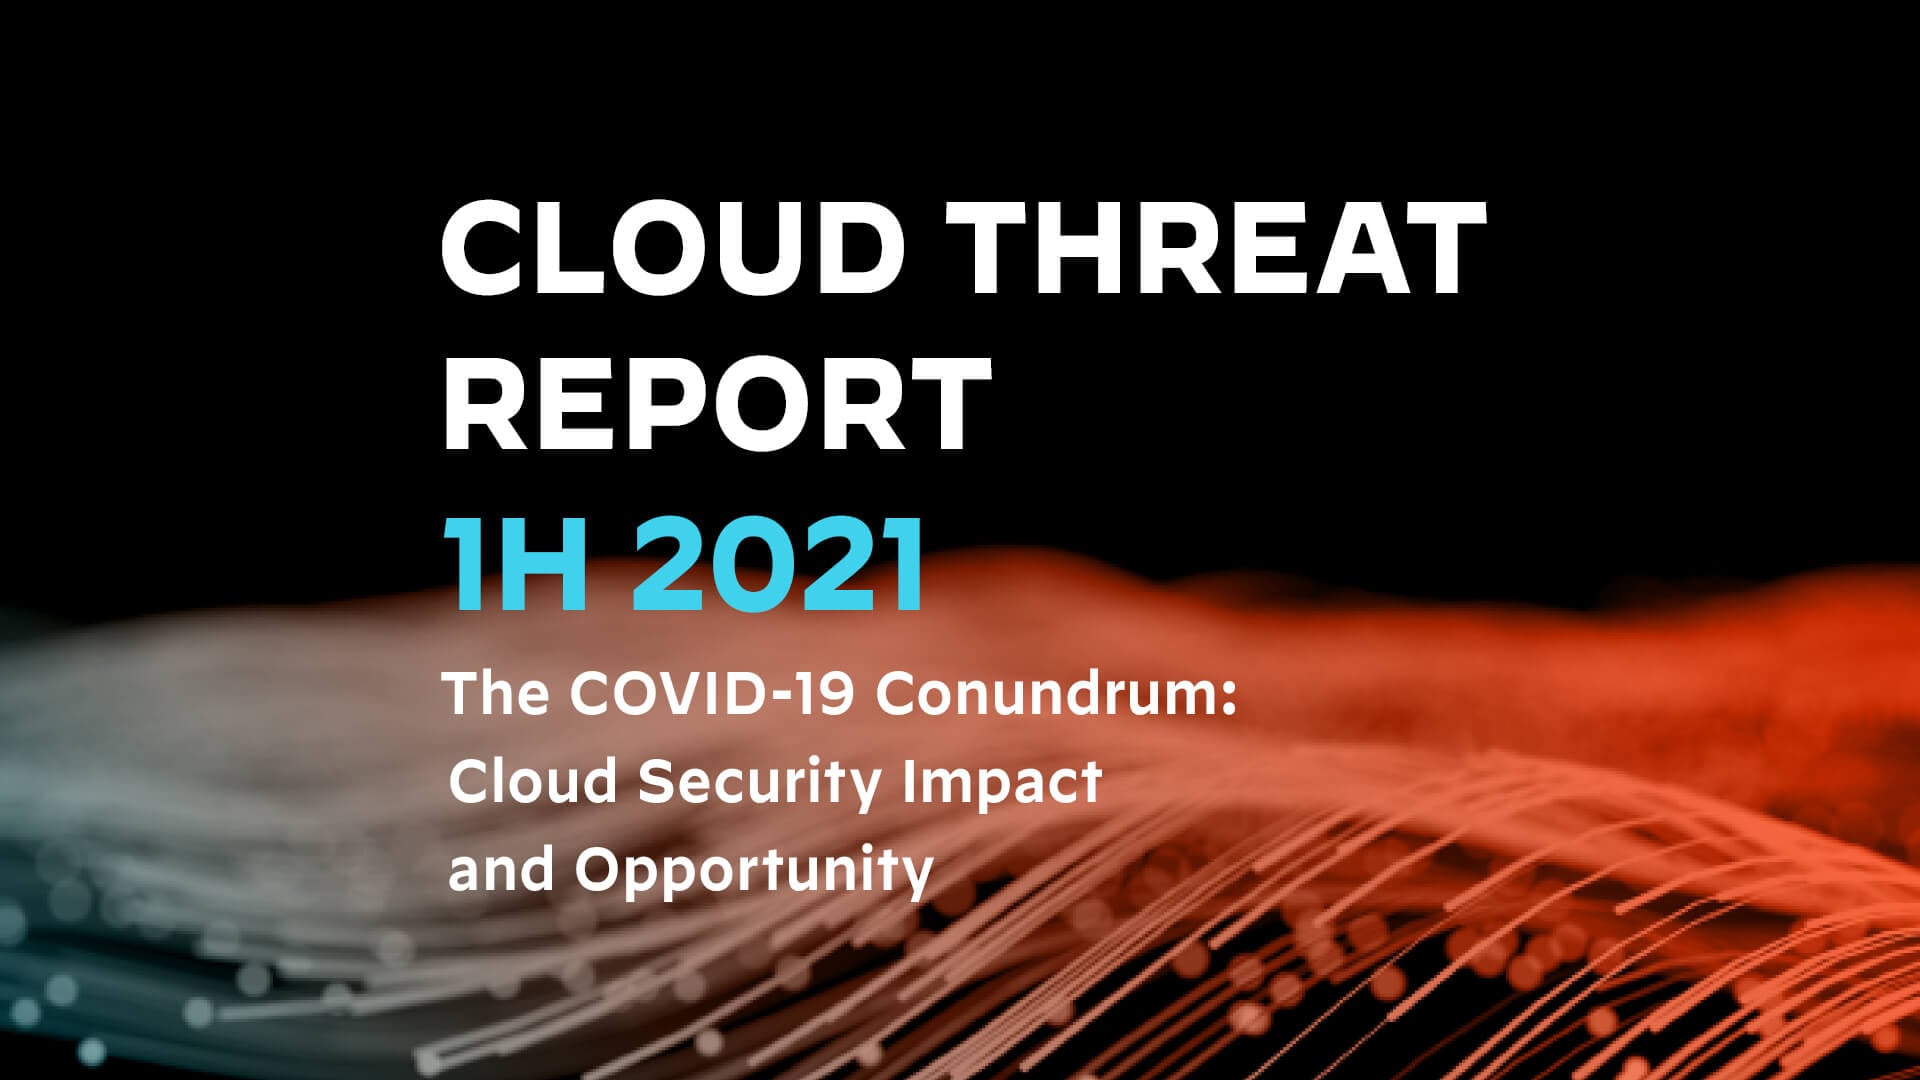 Top Takeaways from the Unit 42 Cloud Threat Report